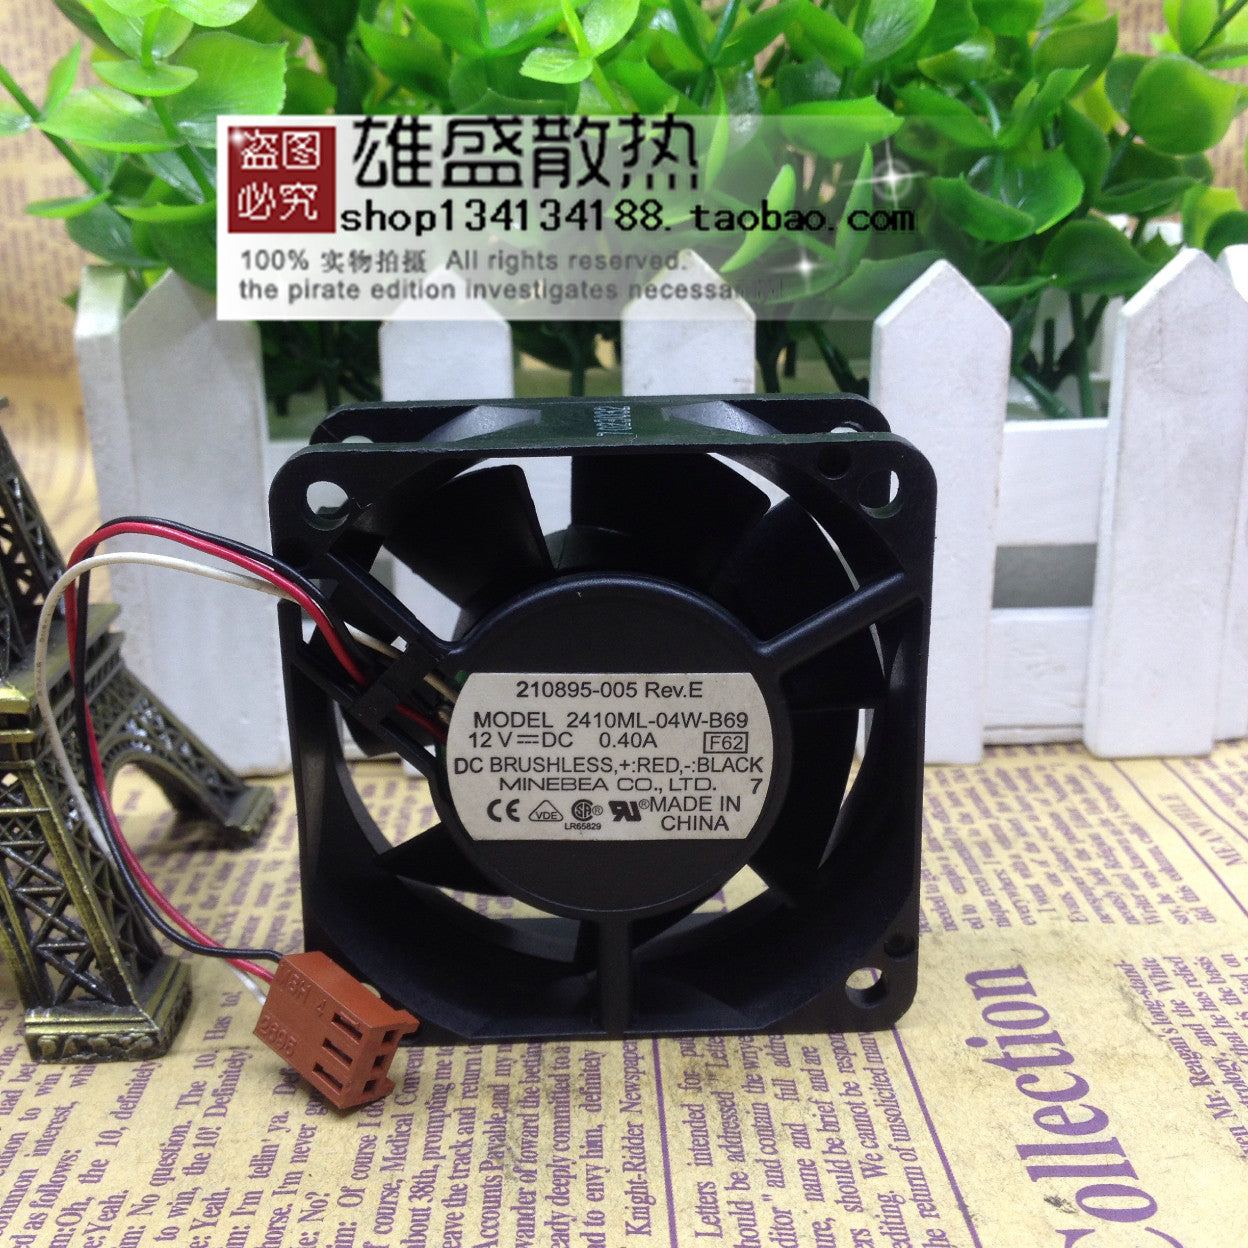 NMB 6025 2410ml-04w-b69 12v 0.40a Three-Wire Industrial Computer Cooling Fan